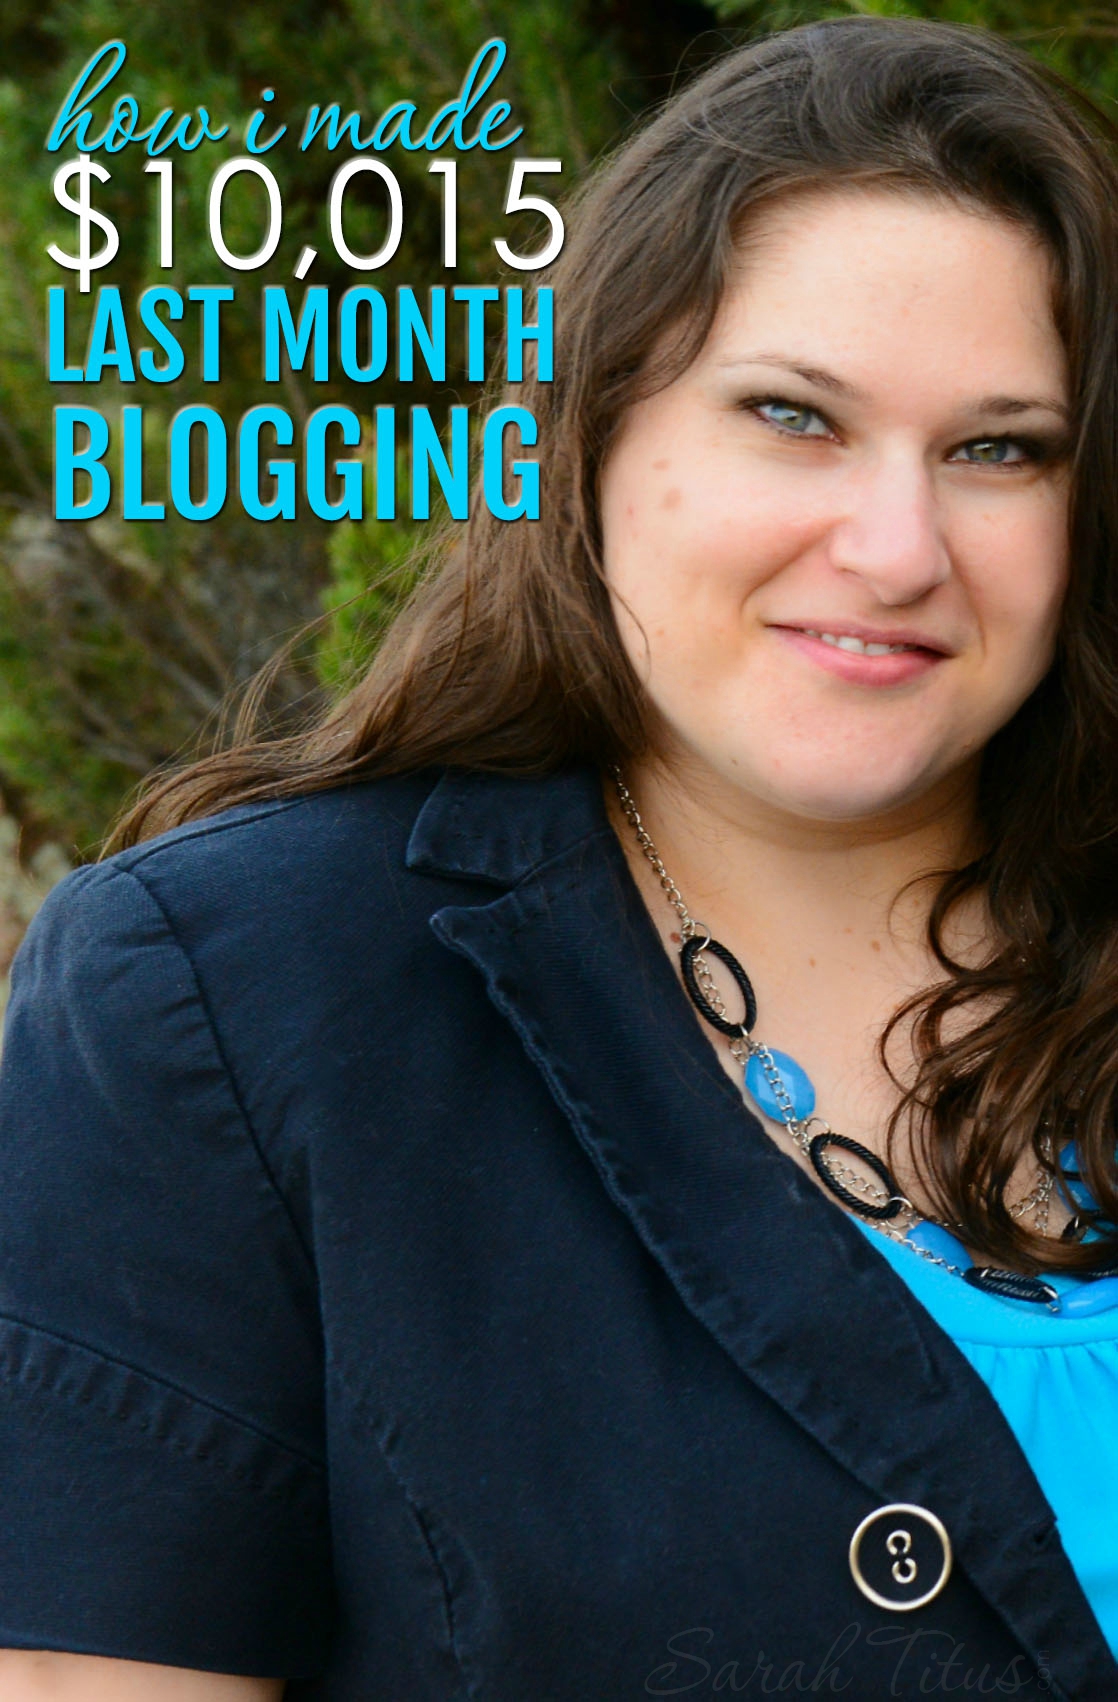 Before my blog turned a year old, I was making over $10,000/month. Here's the long anticipated full income report on how I made $10,015 last month blogging.